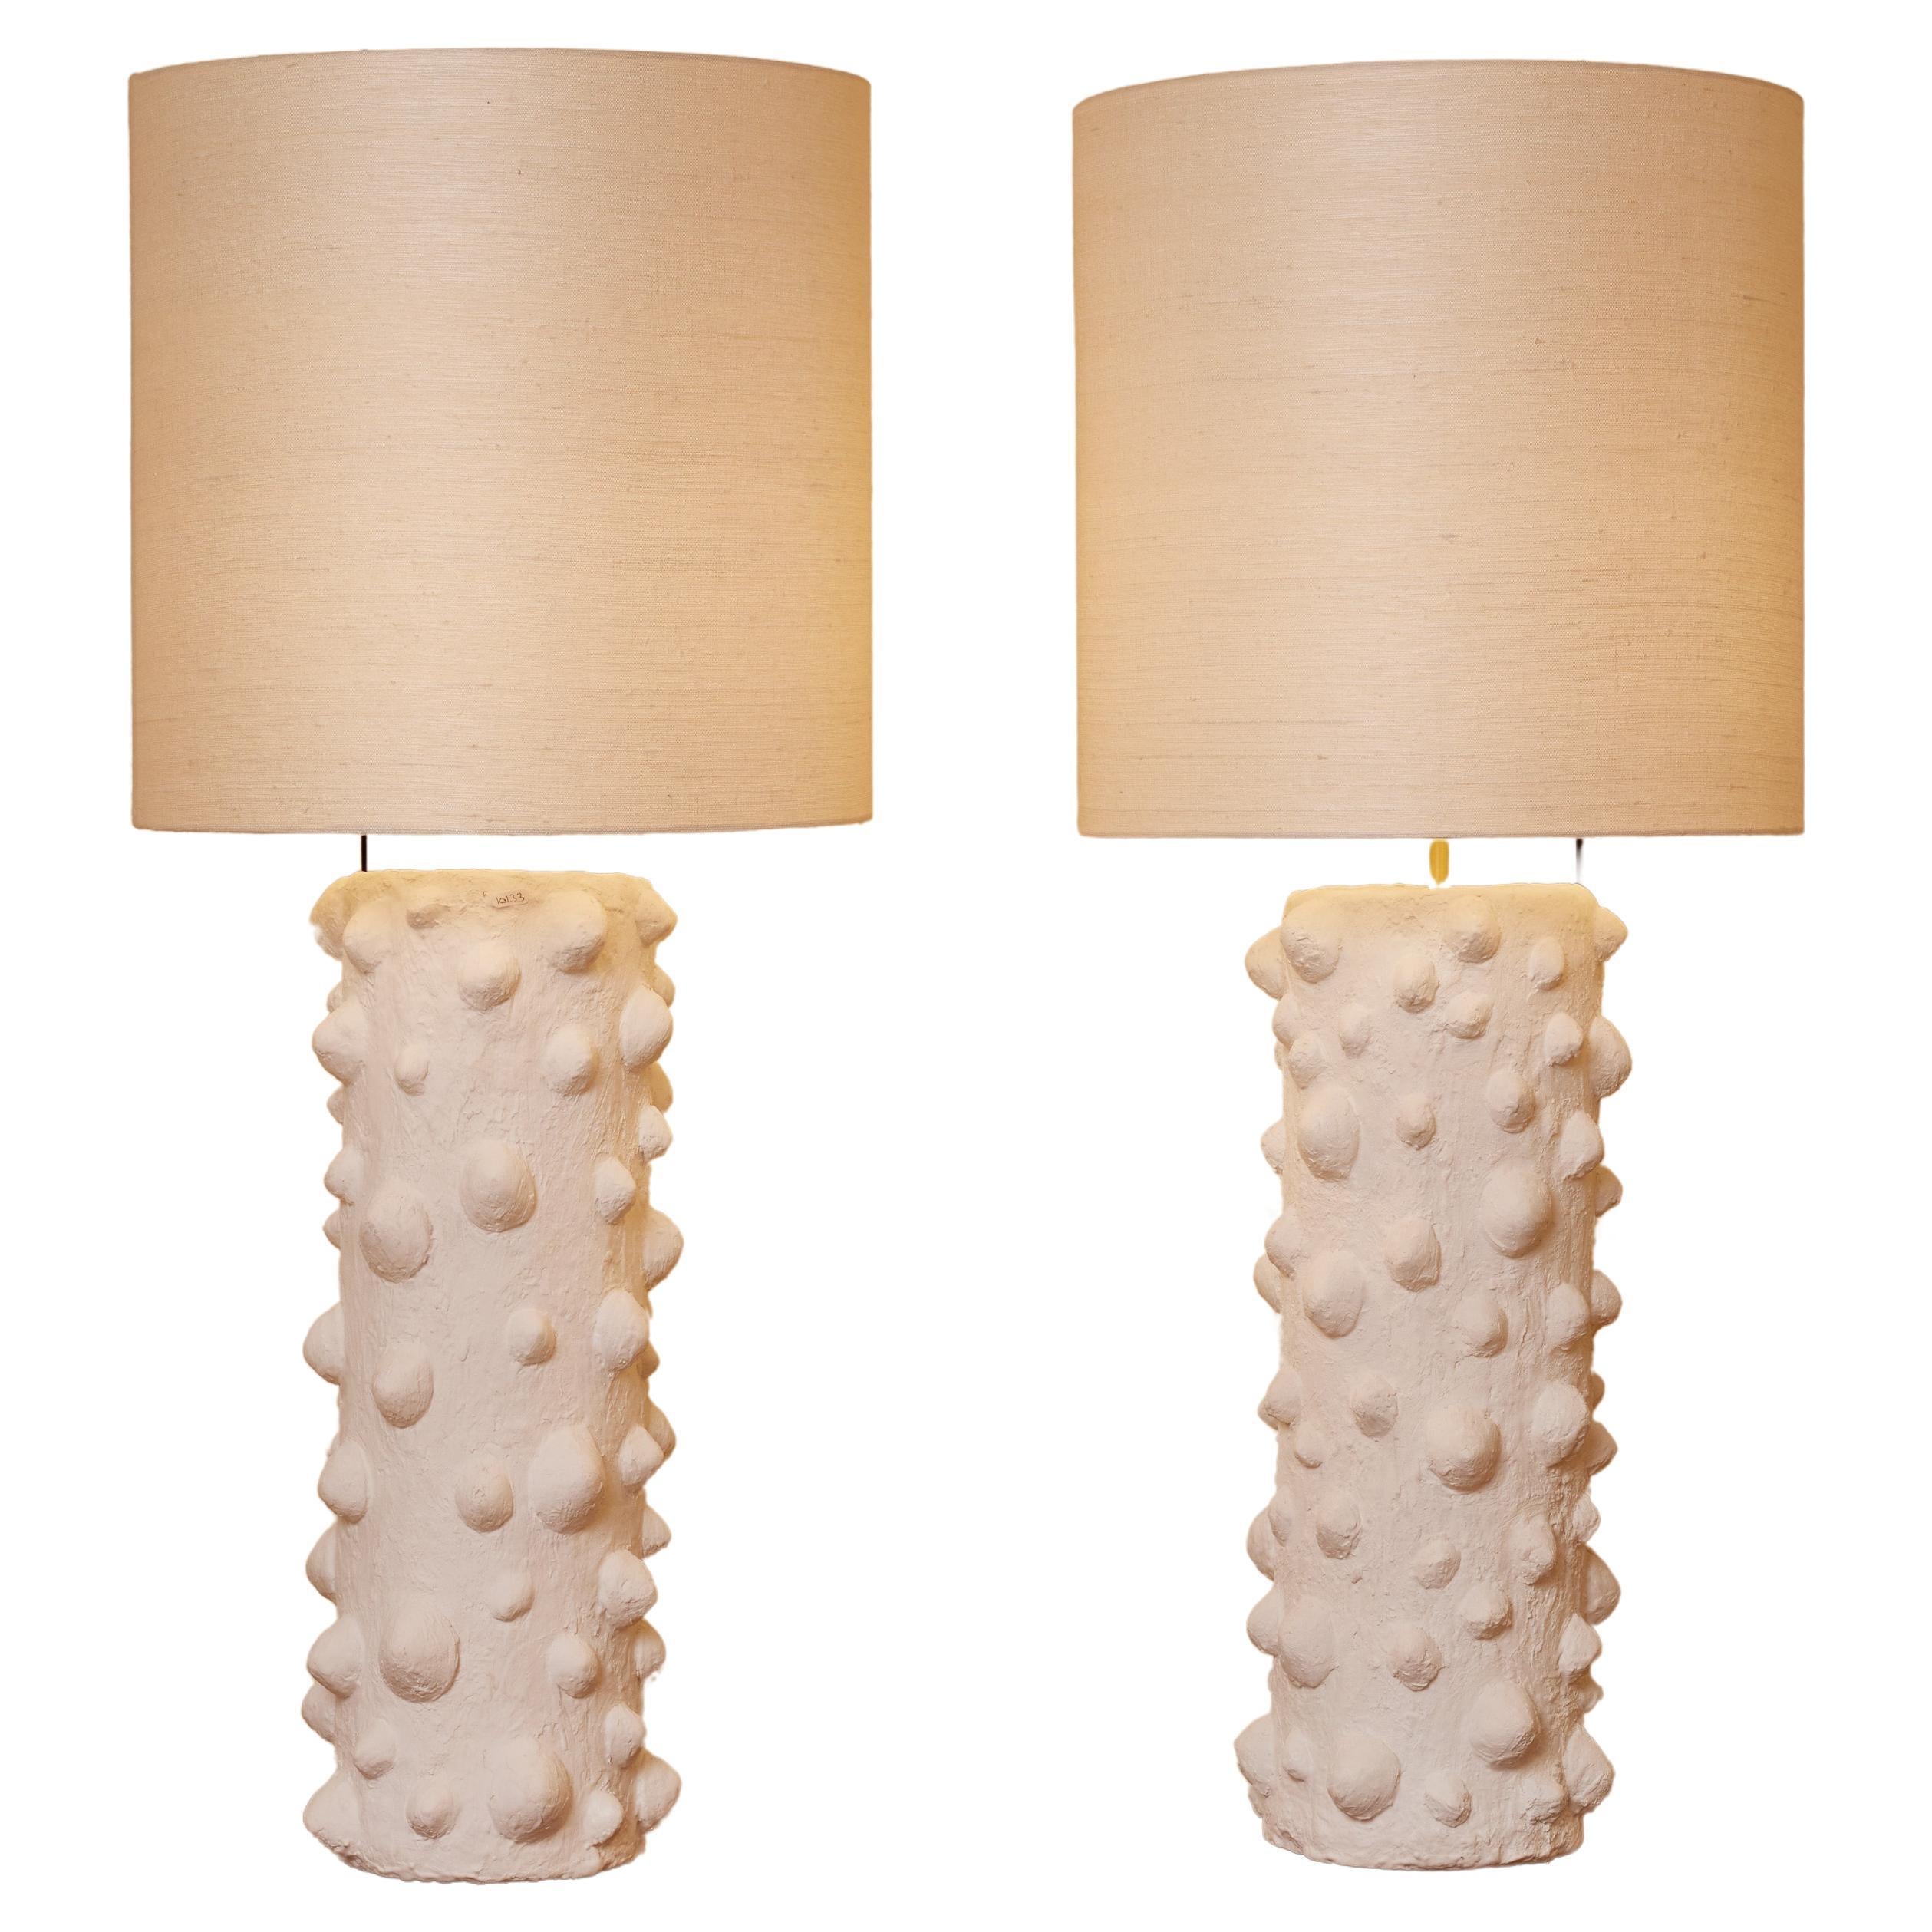 Plaster table lamps by LYNX